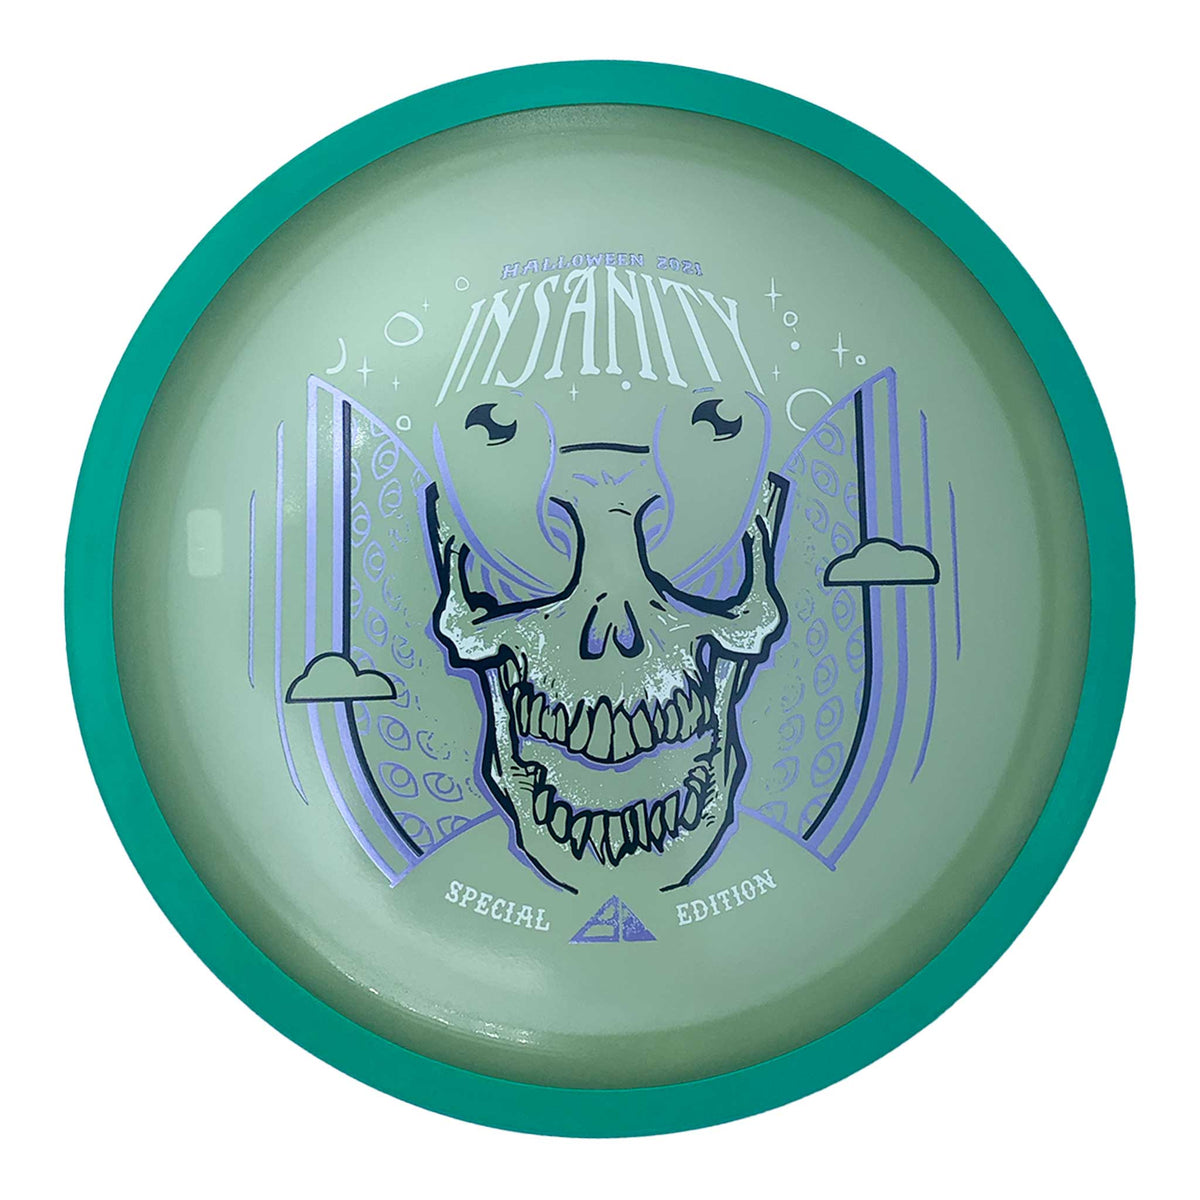 Axiom Discs Eclipse 2.0 Glow Insanity Halloween 2021 Special Edition distance driver - Green